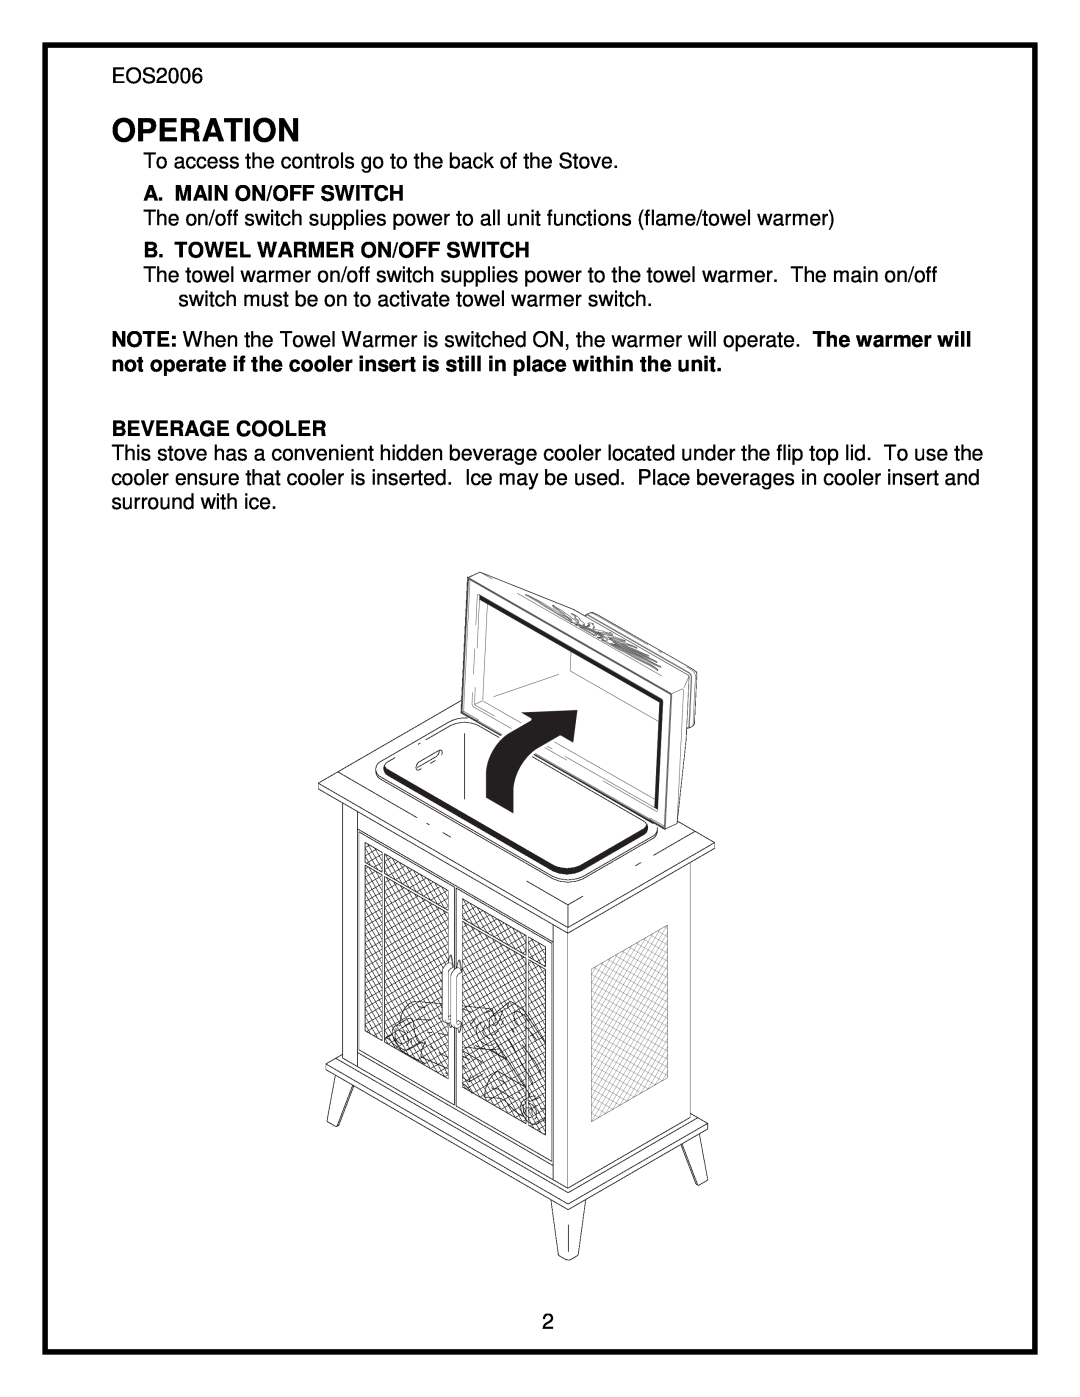 Dimplex EOS2006 service manual Operation, A. Main On/Off Switch, B. Towel Warmer On/Off Switch, Beverage Cooler 